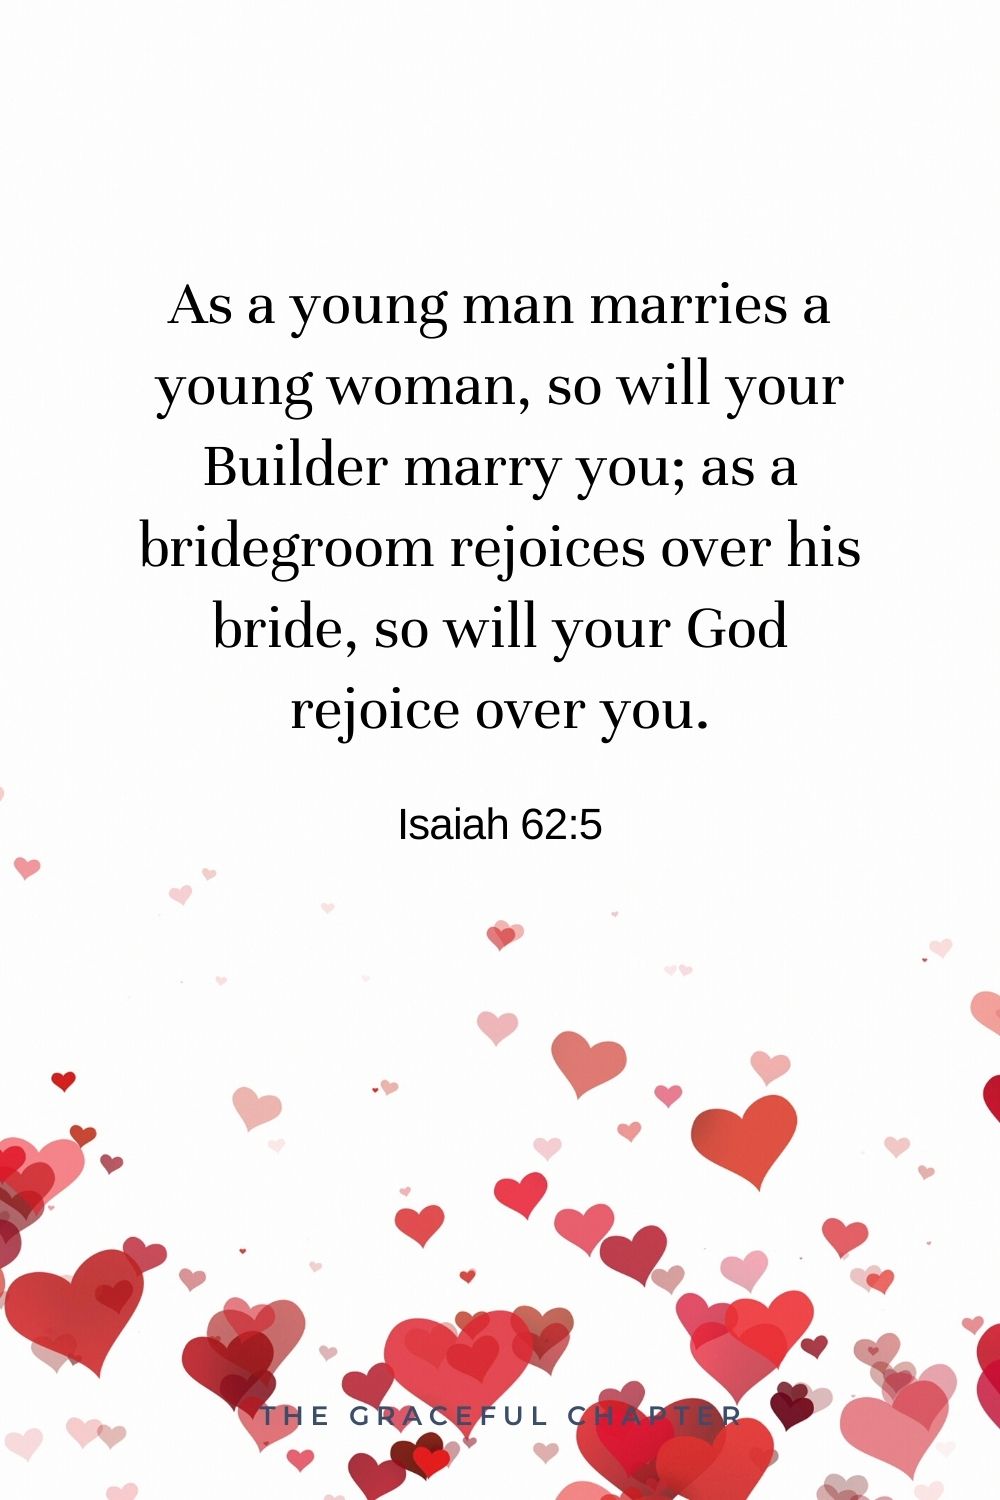 As a young man marries a young woman, so will your Builder marry you; as a bridegroom rejoices over his bride, so will your God rejoice over you. Isaiah 62:5